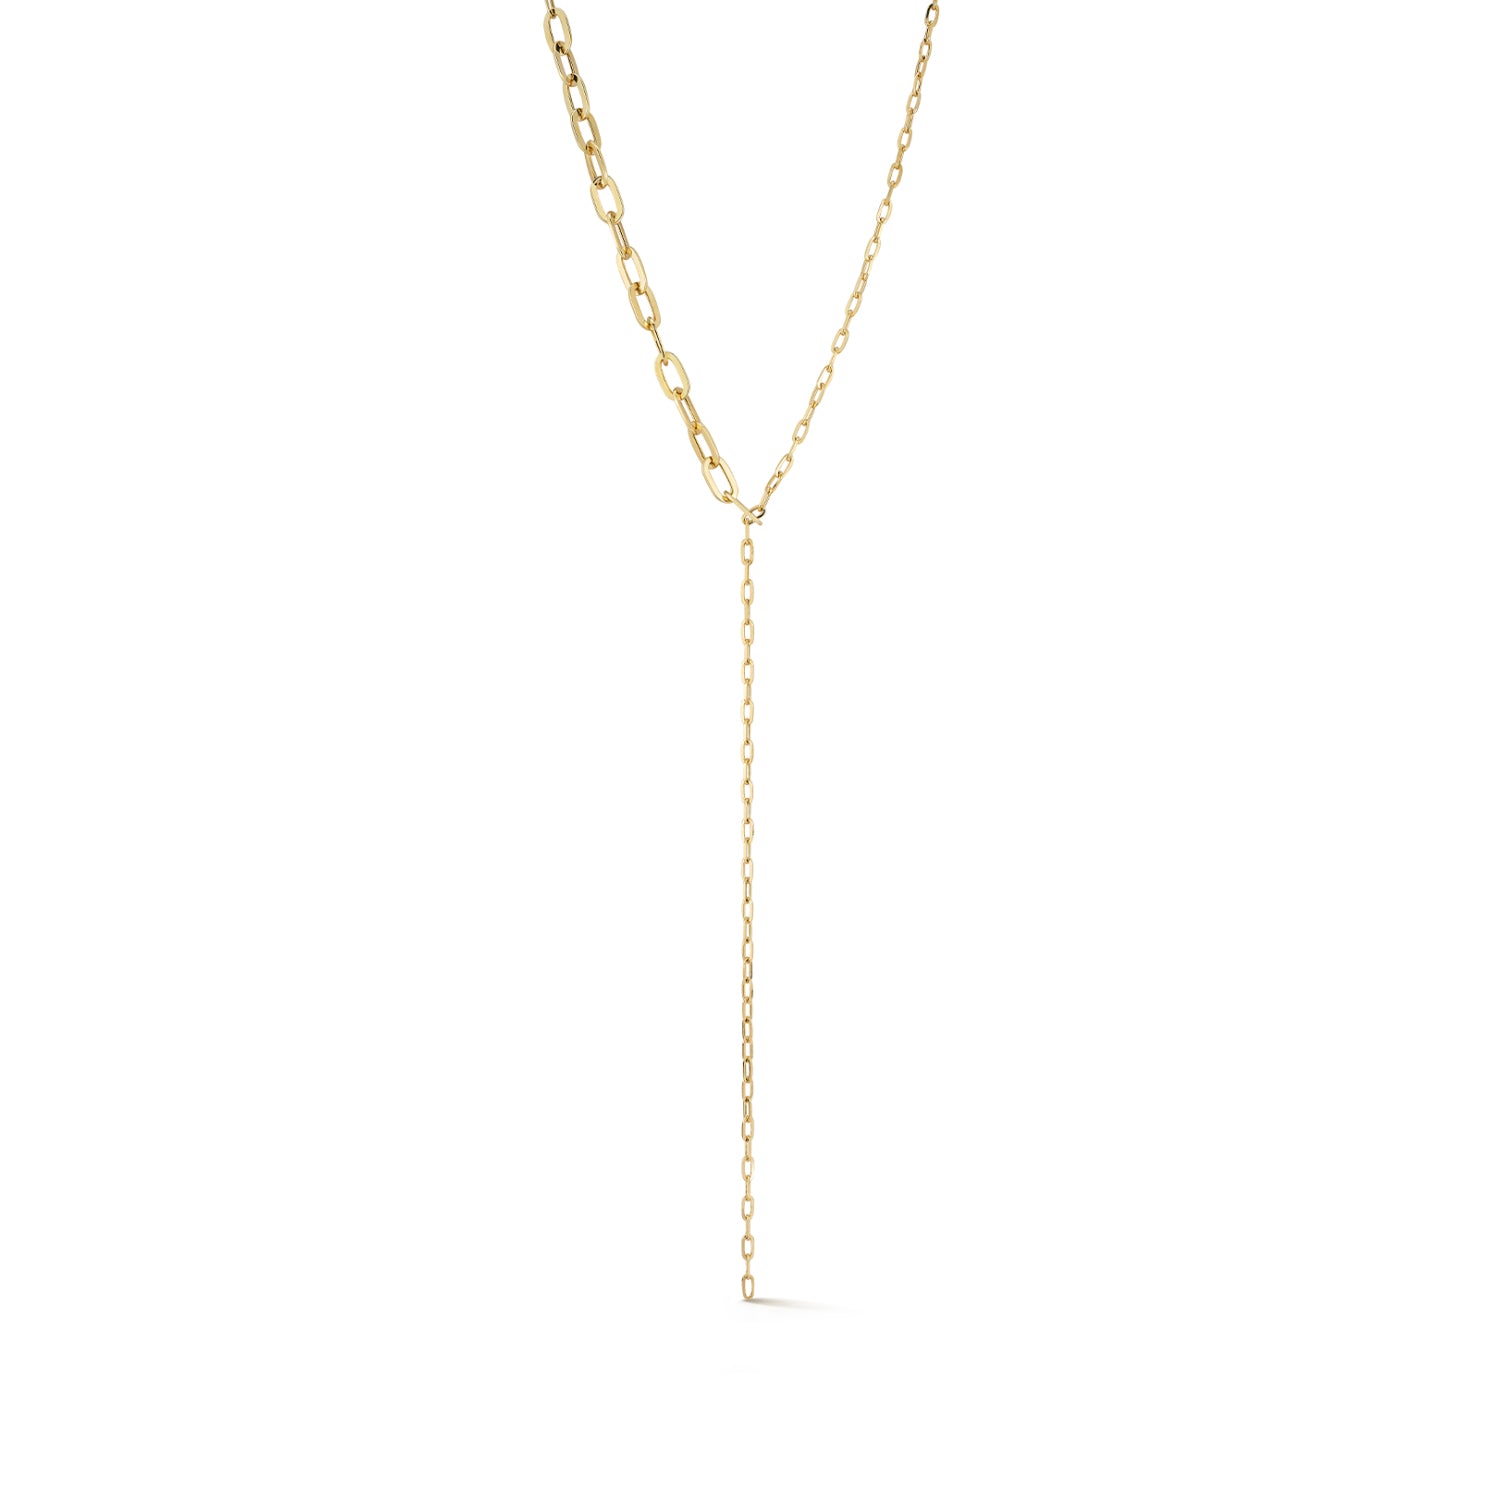 Graduated Chain Link Lariat Necklace in 14k yellow gold